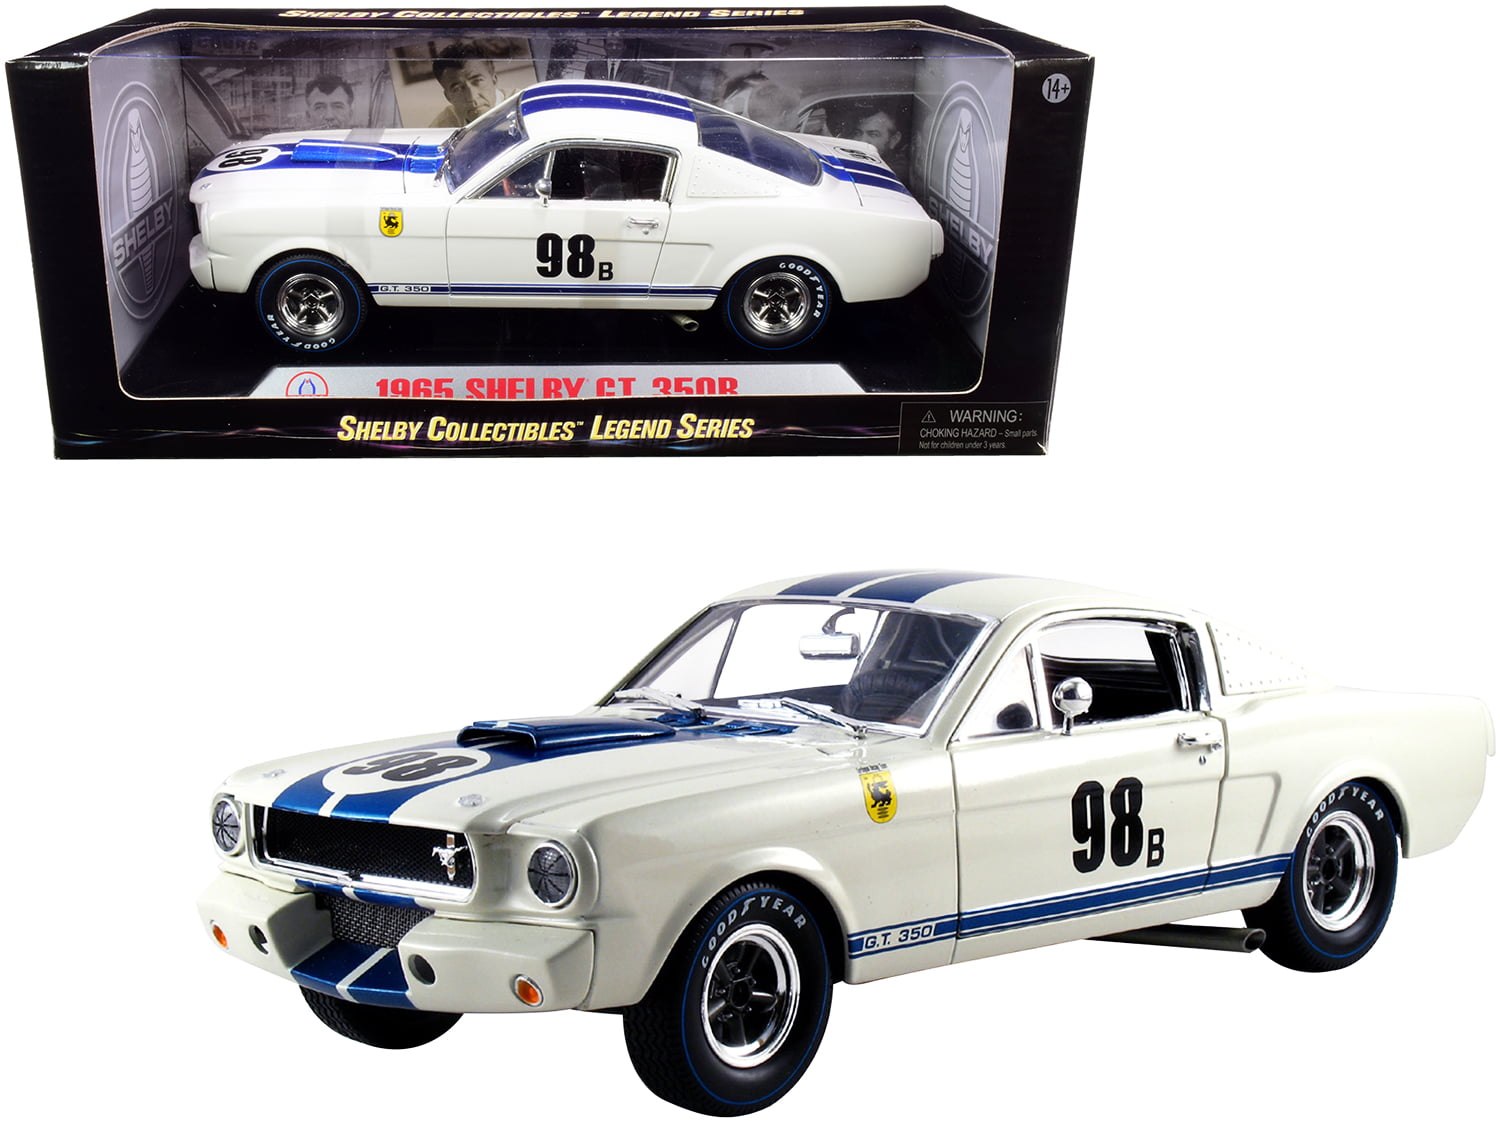 BLUE 1965 FORD SHELBY GT350R MUSTANG M2 MACHINES 1:64 SCALE DIECAST METAL CAR 